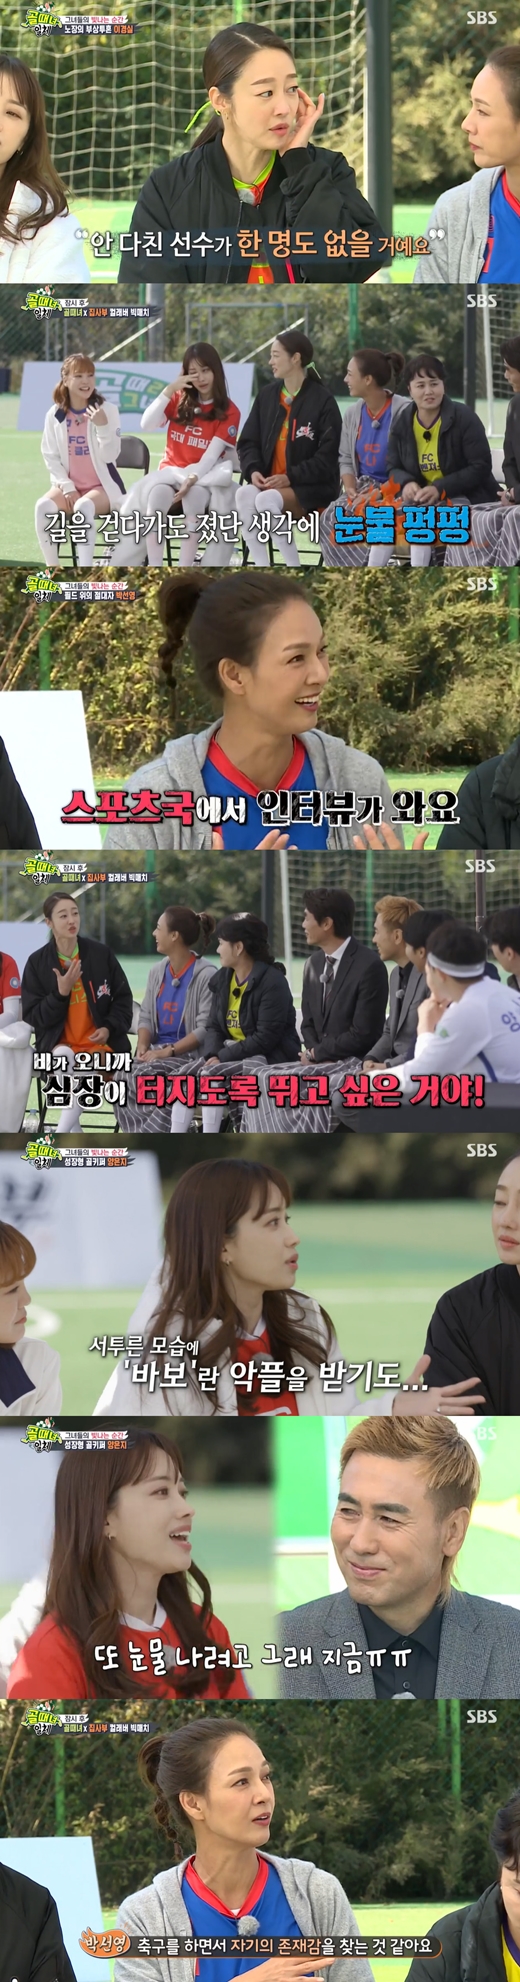 Choi Yeo-jin, Yang Eun Ji, Park Sun-young, Saori and Kyeong-shil Lee revealed their extraordinary soccer passion.On SBS All The Butlers, which was broadcast on the afternoon of the 21st, the second feature of K-sisters was featured by members of The Girls Who Beat Goals (hereinafter referred to as Goals).On the day, the members of the Golden Girl said that they had run to die in Kyonggi. Kyeong-shil Lee said, I really ran.Im a little bit in the pilot, so I tasted blood on my neck. I paid more for the treatment than the pay.Initially, Ahn Young-mi, Saori, and Kyeong-shil Lee were injured in the Kyonggi of FC Gavengers and FC World Class.Kyeong-shil Lee should have sat down at home and showered; Choi Yeo-jin nodded, saying there will be no one who is not really hurt.Kim Byung-ji also laughed at the back story, saying, The amount of muscle tape is more than the national representative.Choi Yeo-jin said, Why did men talk about soccer with the army so much, and now I know, I want to go to the army. I thought about what is better than the joy of soccer.I think it would be worse than this, he said, showing tears and embarrassing the cast of All The Butlers.Yang Eun Ji also showed tears; when he was in charge of the goalkeeper, he said: It was really difficult.I was also suffering from a lot of bad news, he said. I was the first to talk about it, but I wanted to be recognized by the bishop.I saw it every time I got a goal, but he did not look at me. Kim Byung-ji paid back the last time with the word You were the best, Eunji. I also thought of the regret of being eliminated again: Saori said, I lost at Kyonggi and cried all three days, I felt like I had broken up with my boyfriend, so I was tearful even as I went down the road.I could not play soccer for three days, and I could not eat rice properly. Choi Yeo-jin said: I missed qualifying too early, Ive been drinking all two weeks, I want to beat my heart in the rain.So I went out and ran, but I thought I was going to run and I was going crazy. On the other hand, Park Sun-young said, It seems to be looking for a presence while playing soccer.